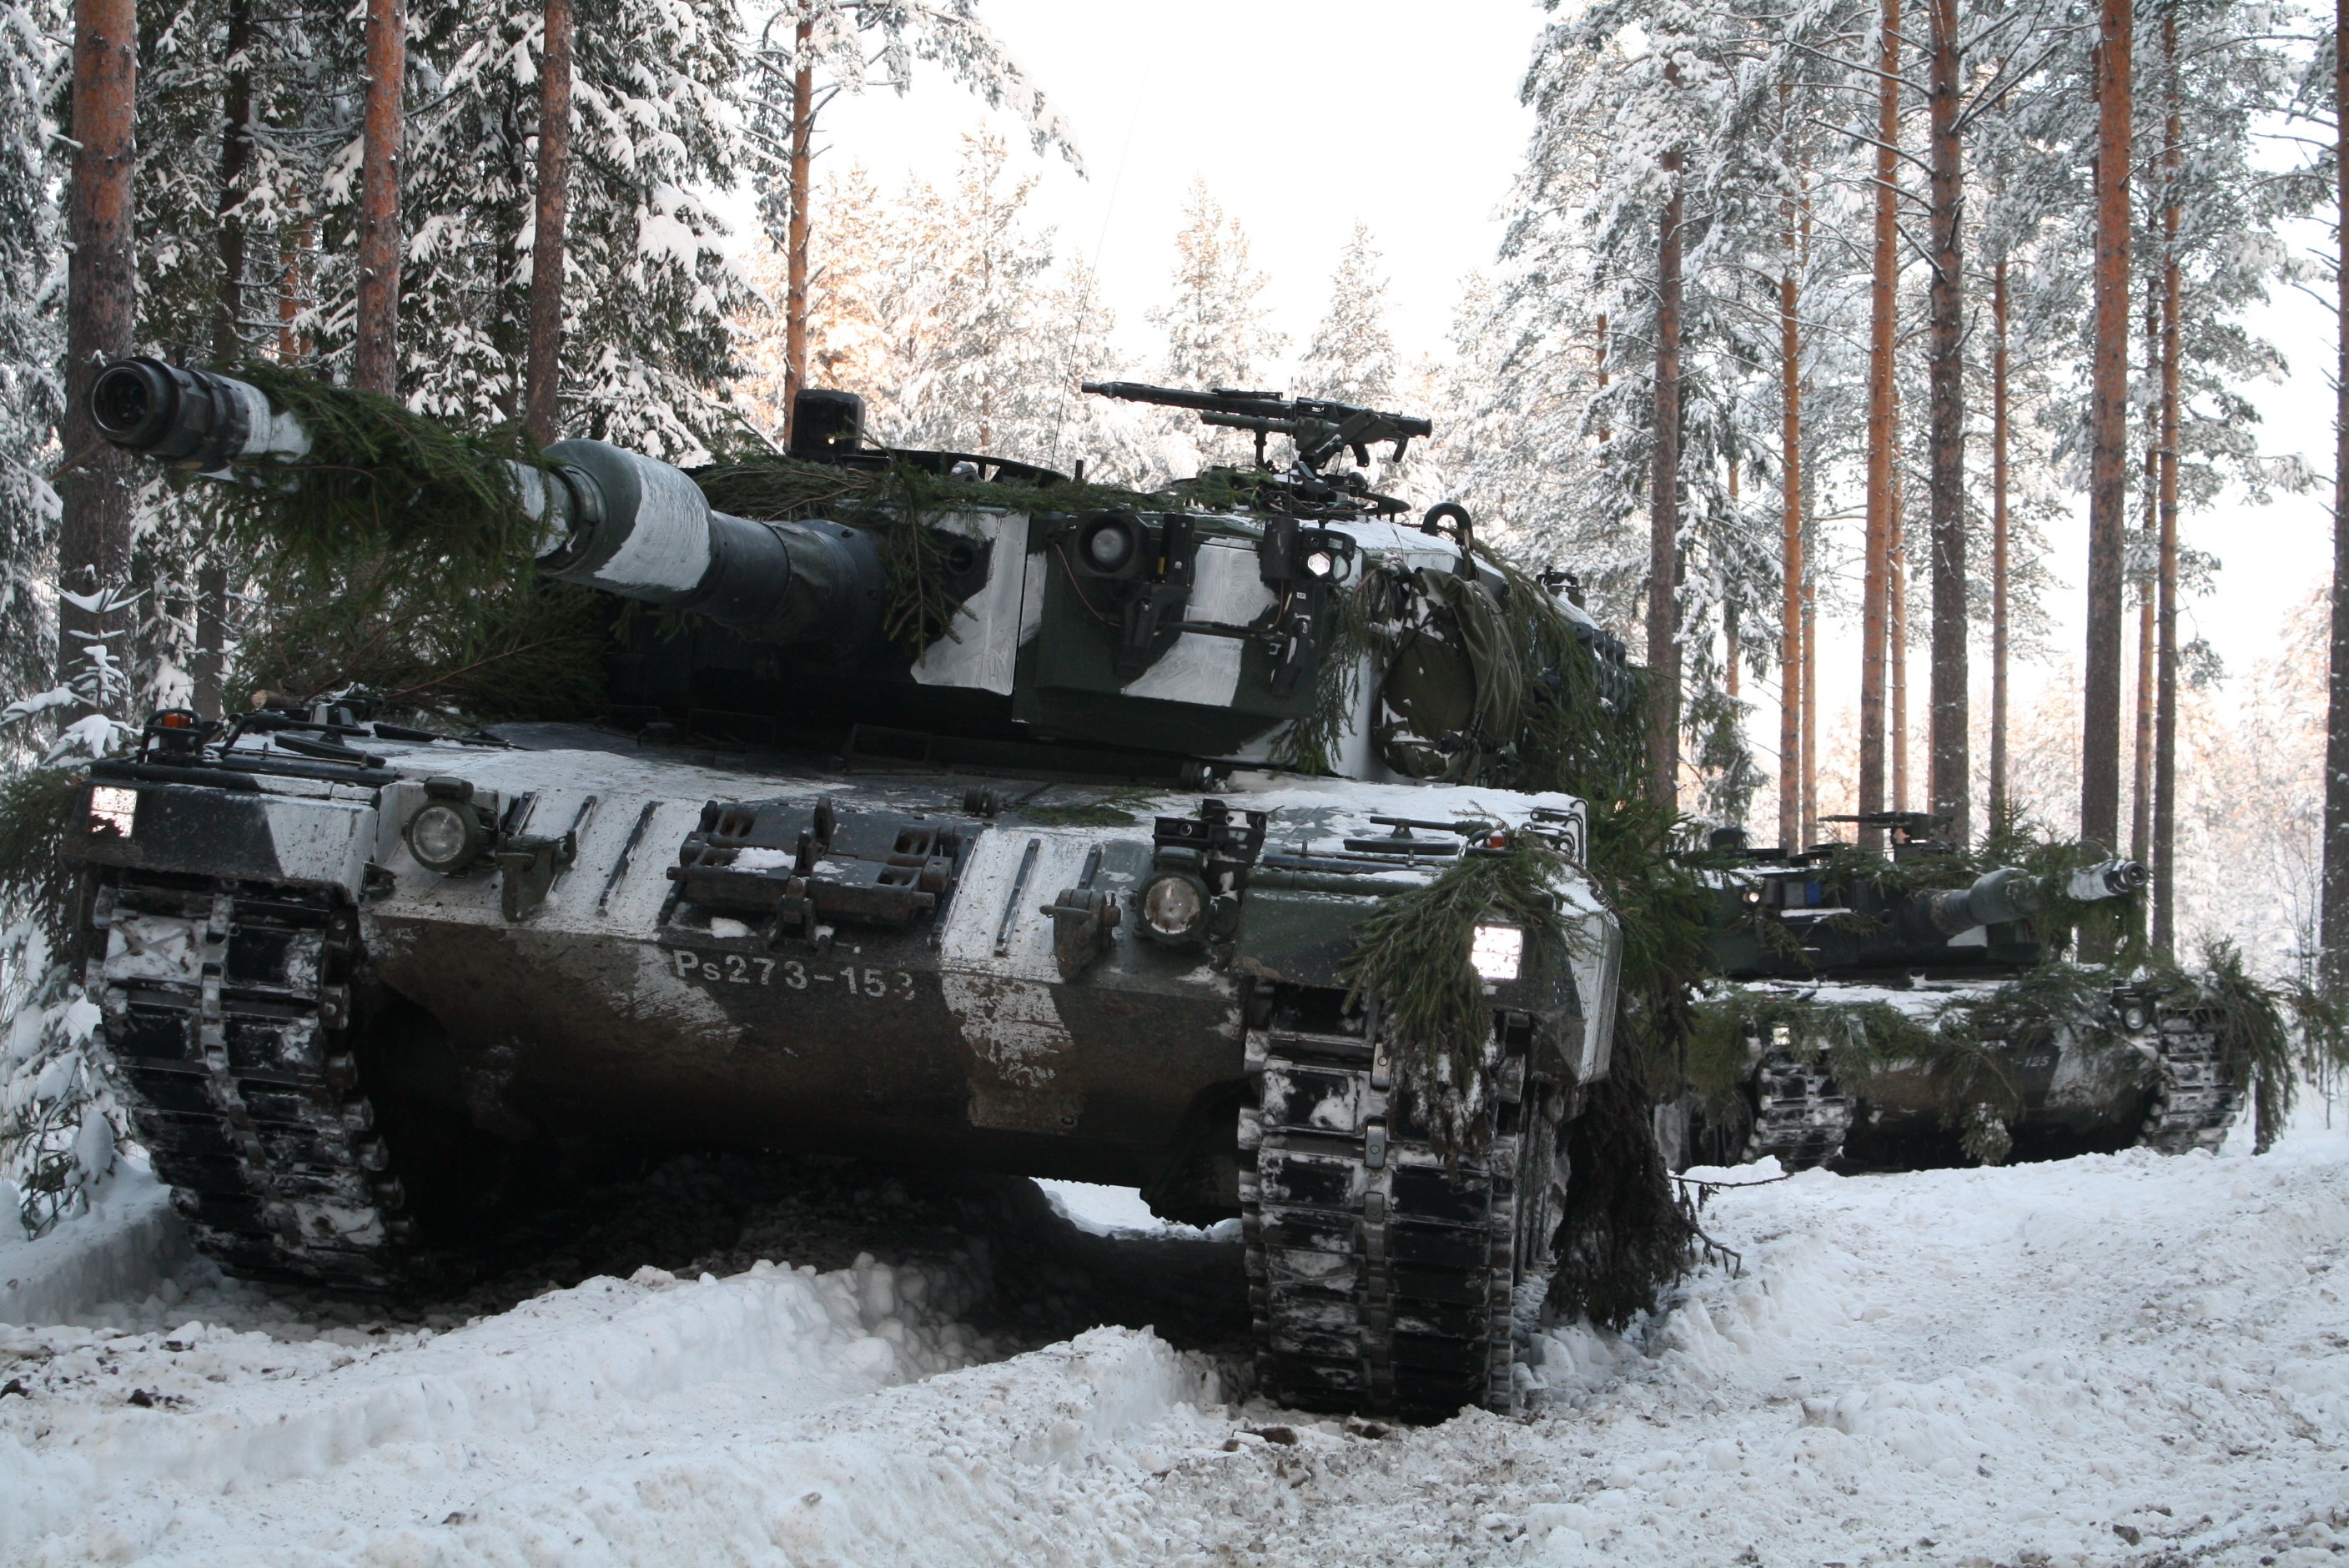 Norway abandons Leopard 2A4 tank upgrade